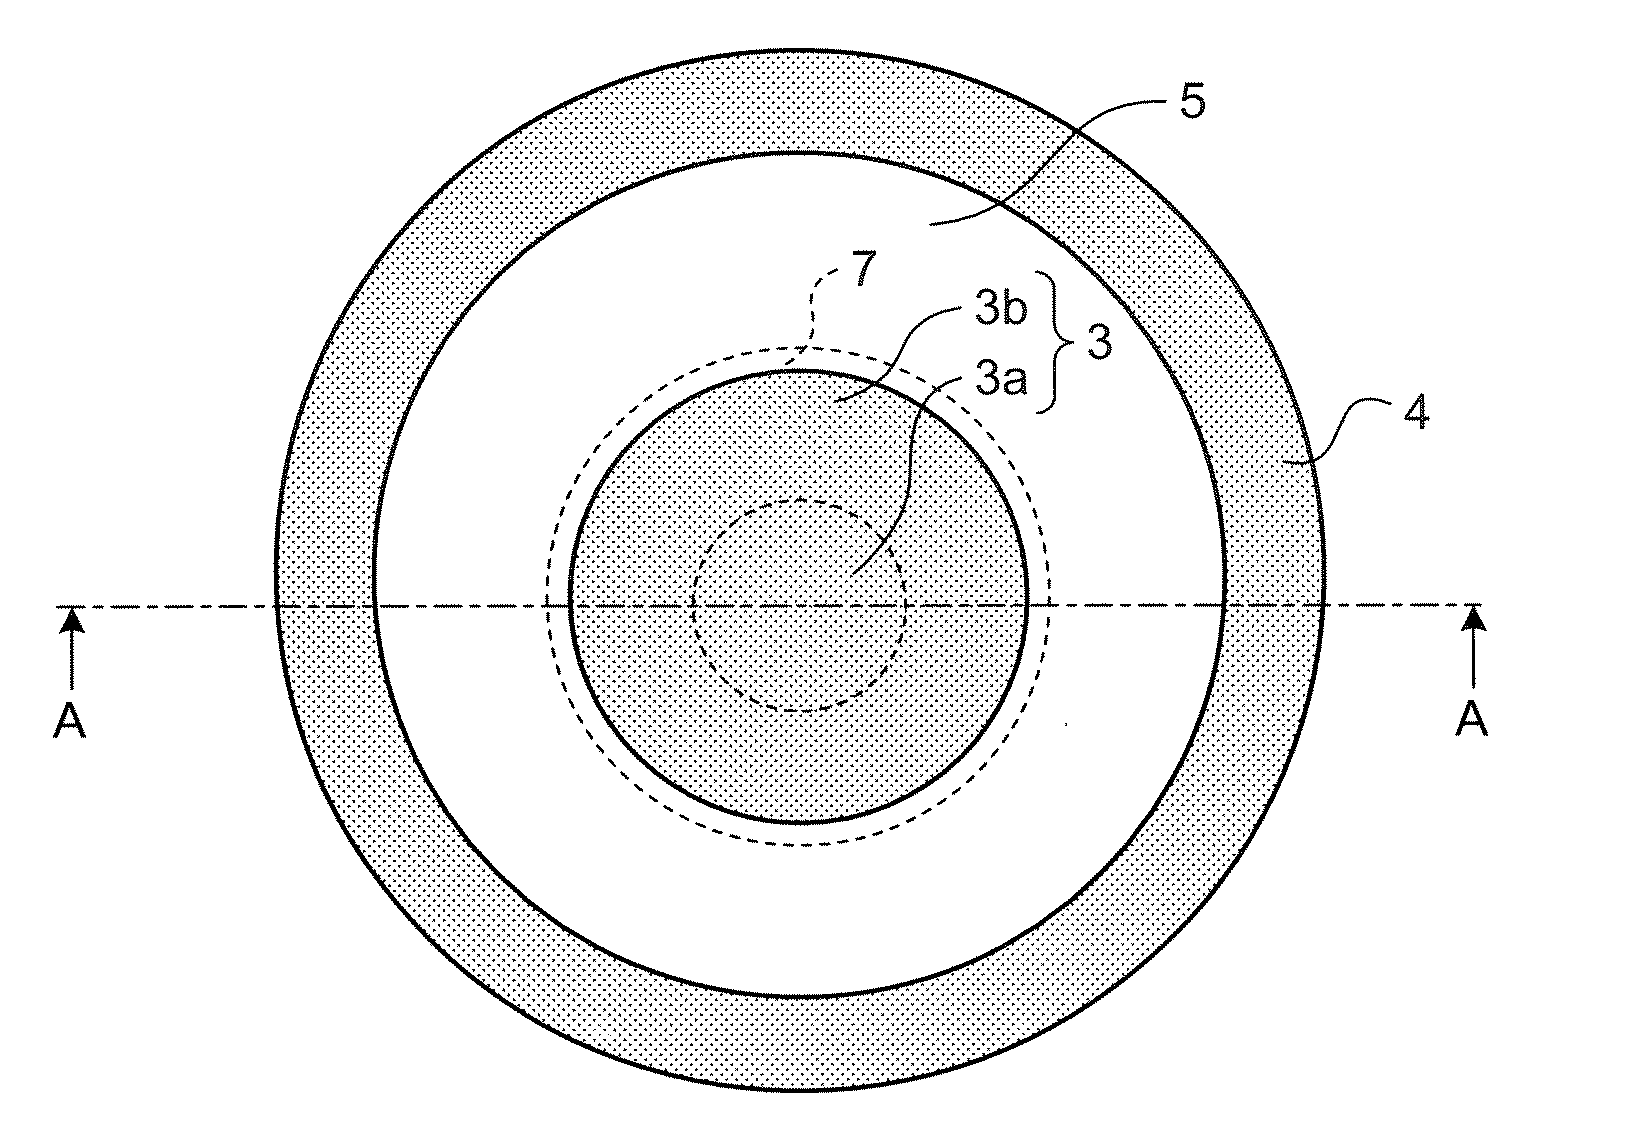 Nitride-based semiconductor device